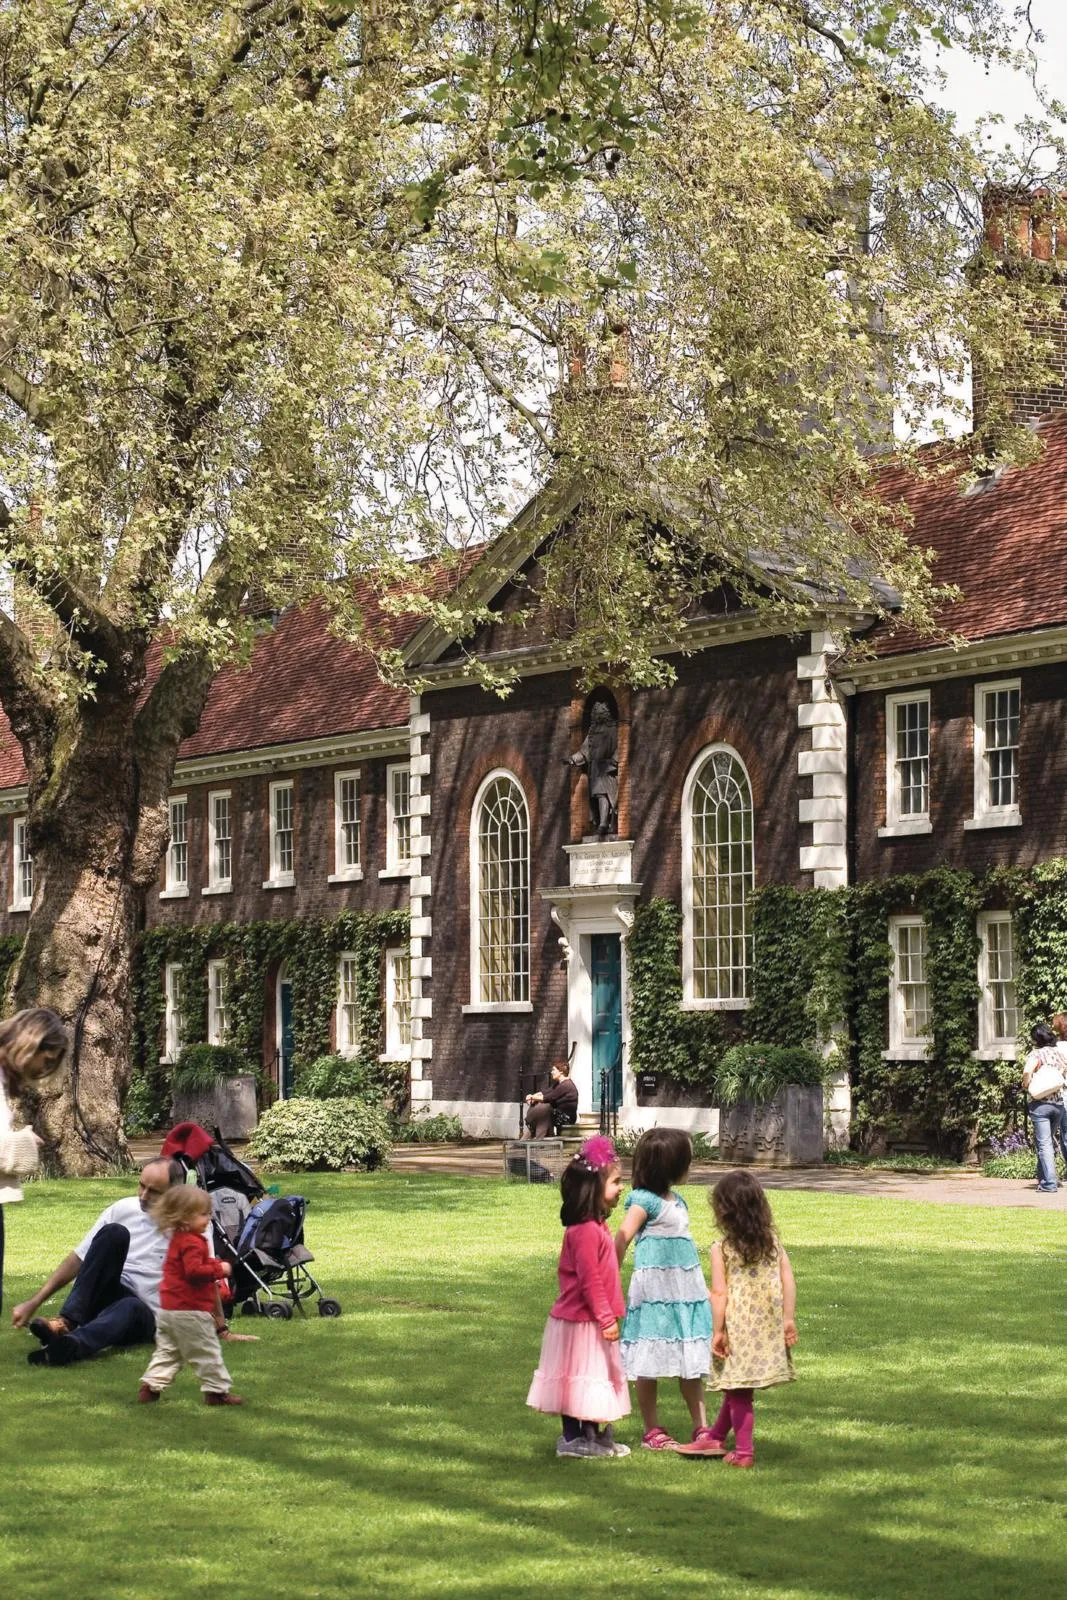 Visit the Geffrye Museum to celebrate the joys of the urban garden and join a guided cycle tour around East London's green spaces.